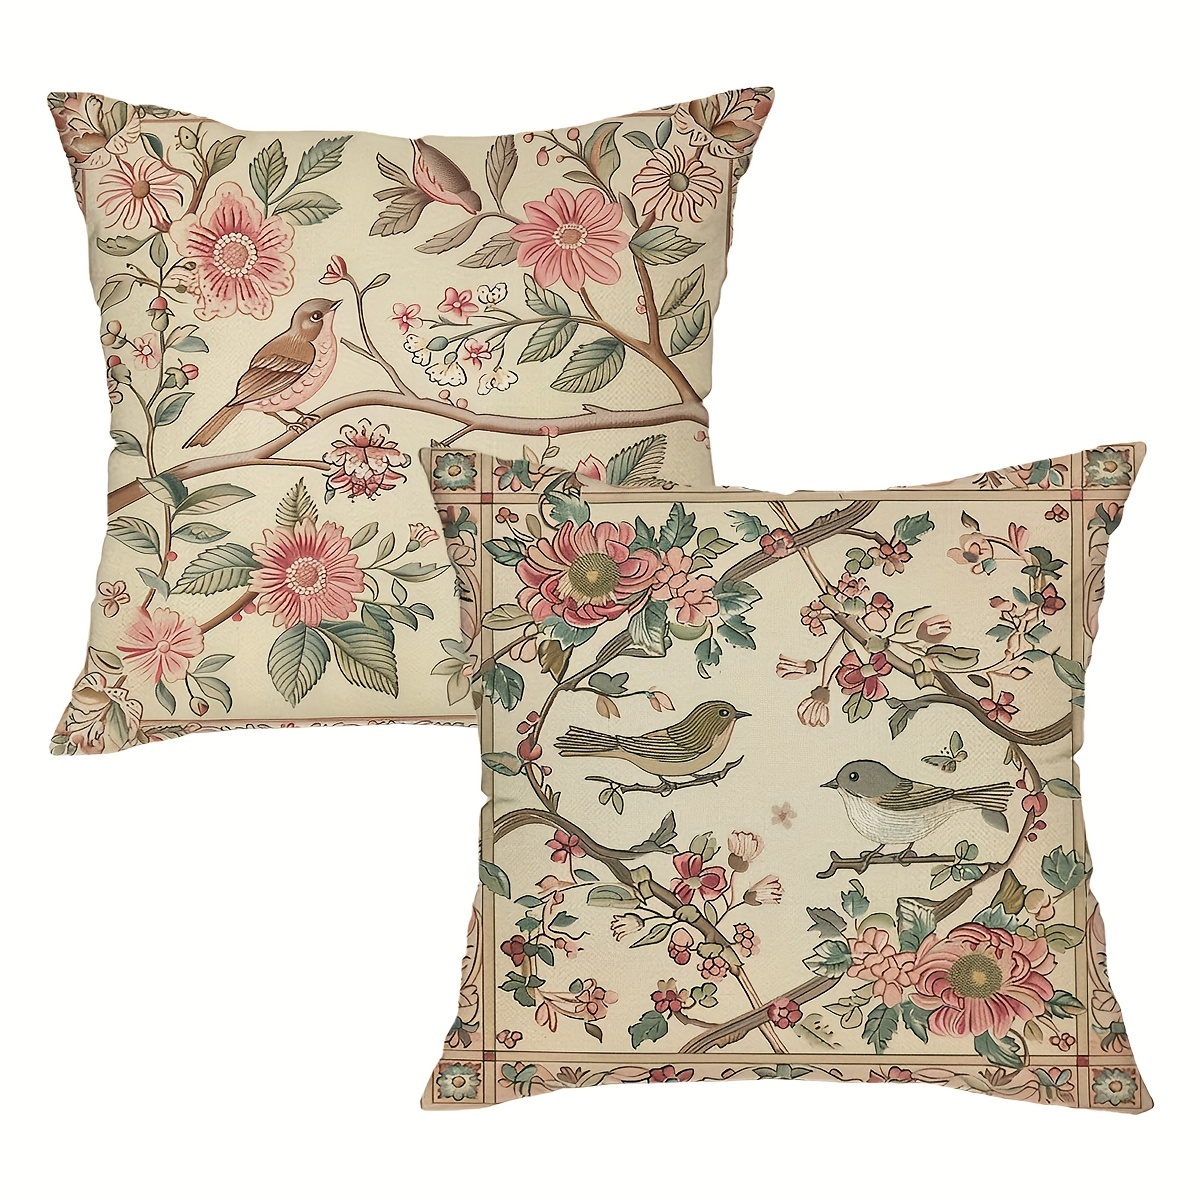 

& Birds 2-piece Throw Pillow Covers, 18x18 Inch - Linen Blend, Zip Closure, Hand Wash Only - Perfect For Sofa, Bedroom, Office, And Farmhouse Decor